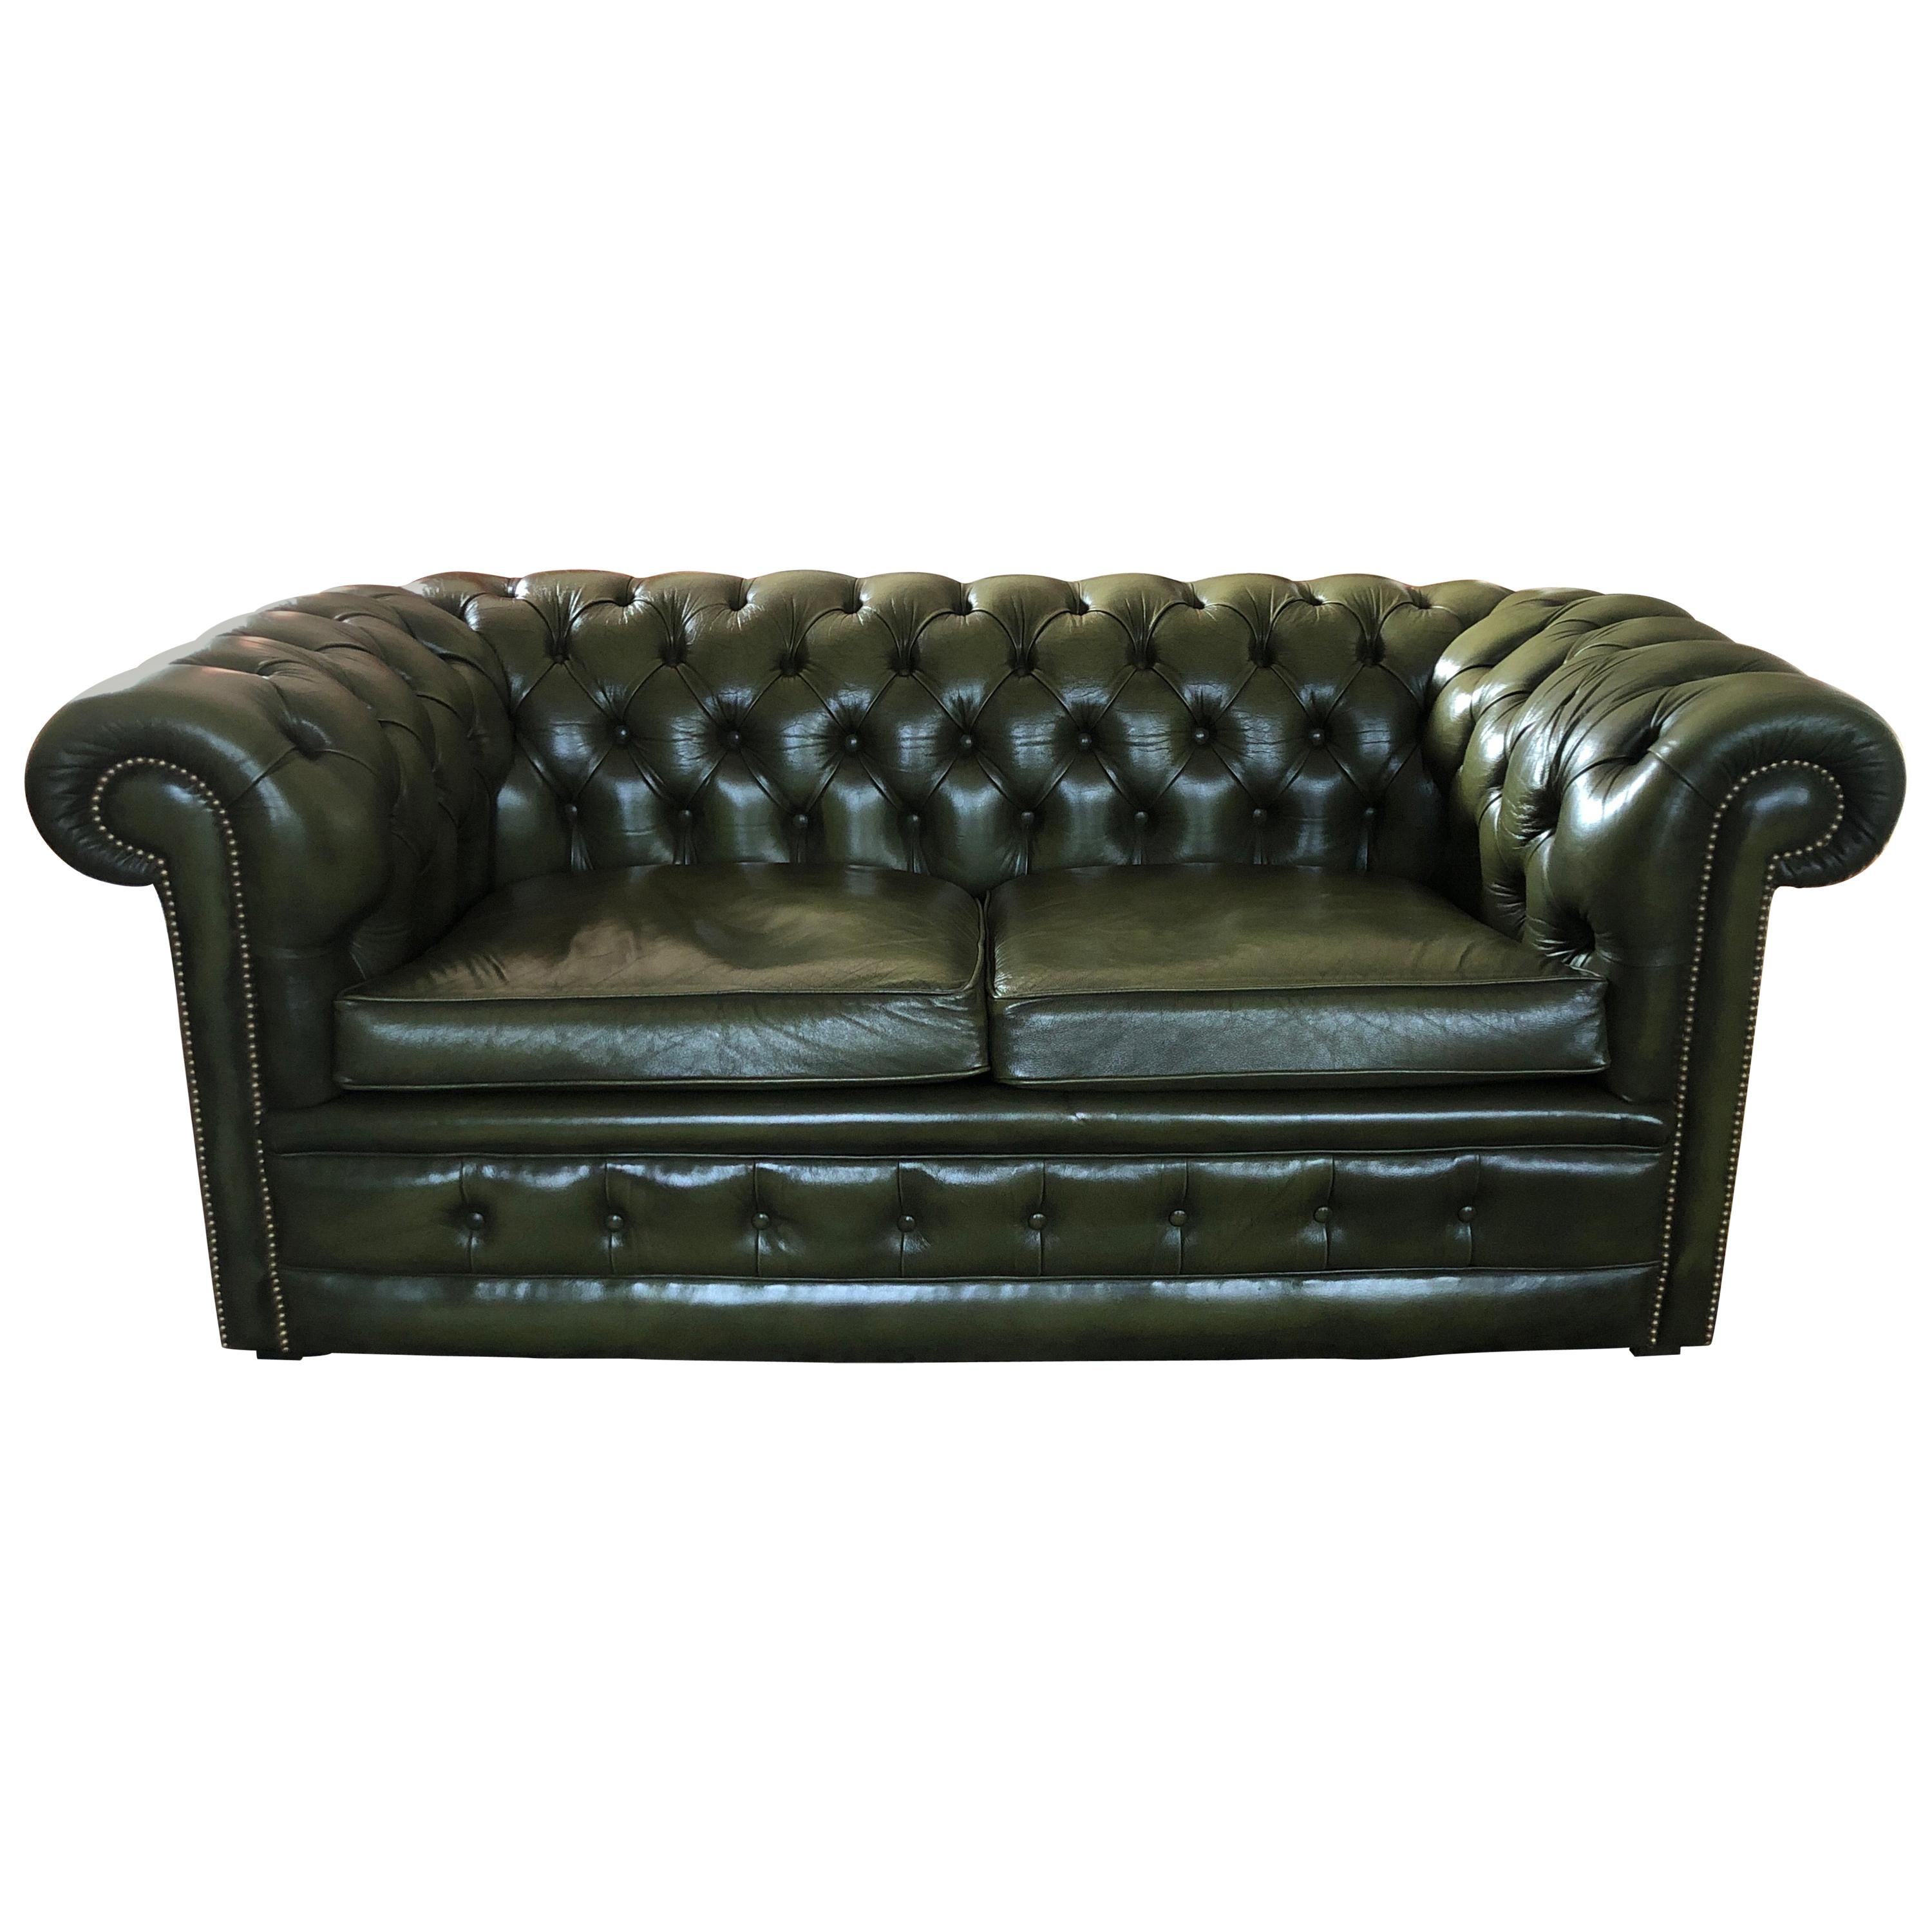 20th Century Two Seated Chesterfield Sofa in Dark Green Leather